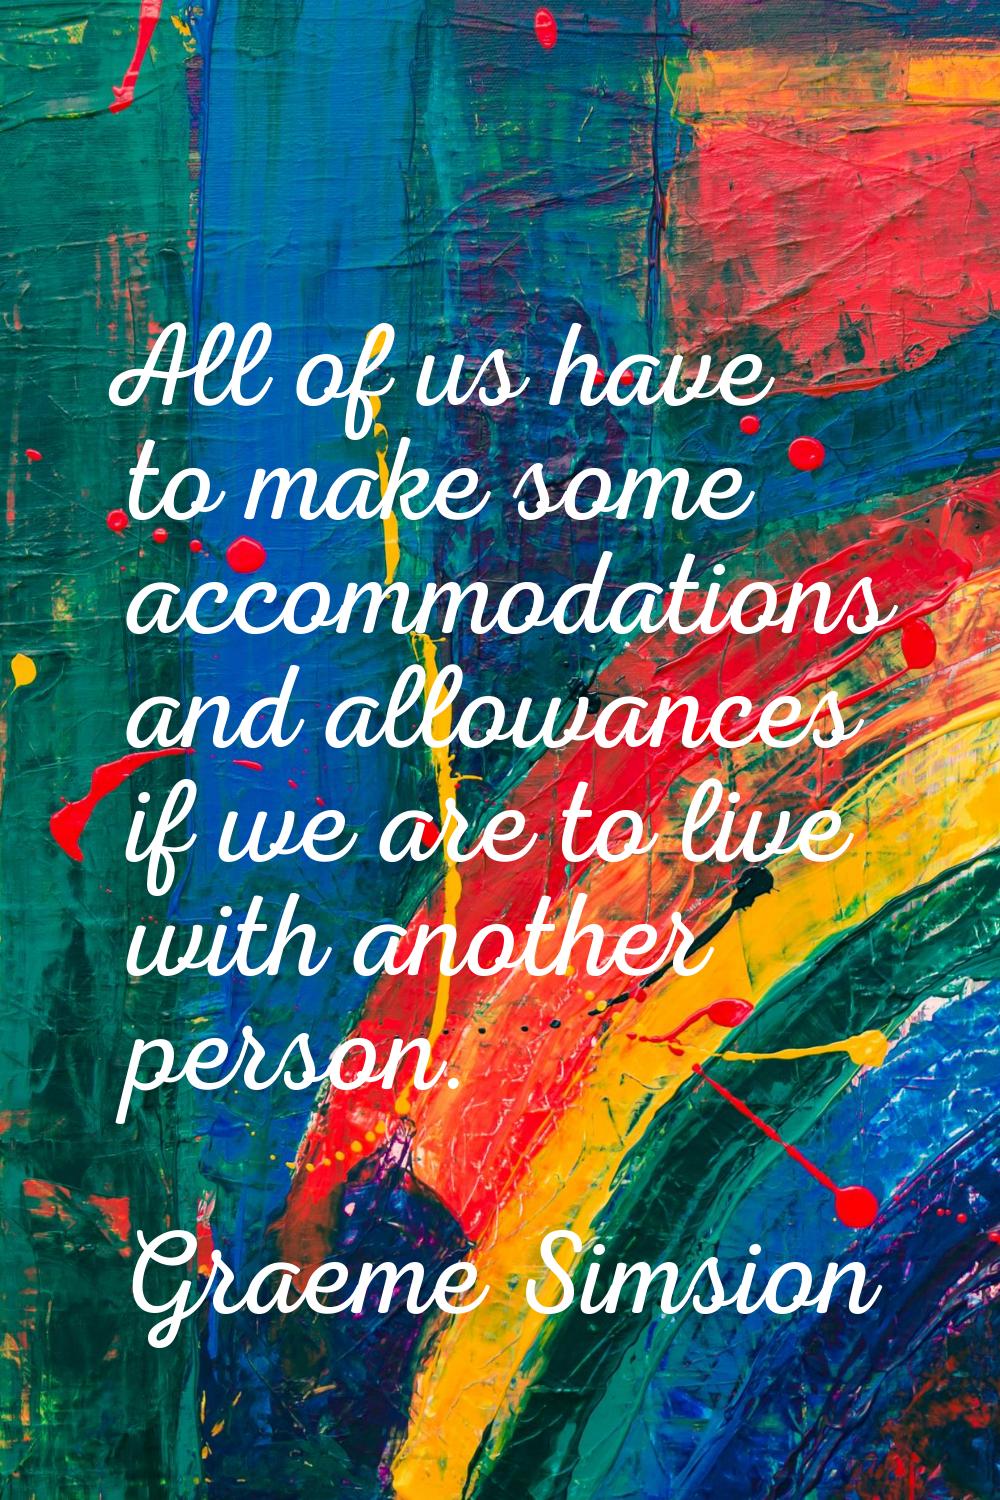 All of us have to make some accommodations and allowances if we are to live with another person.